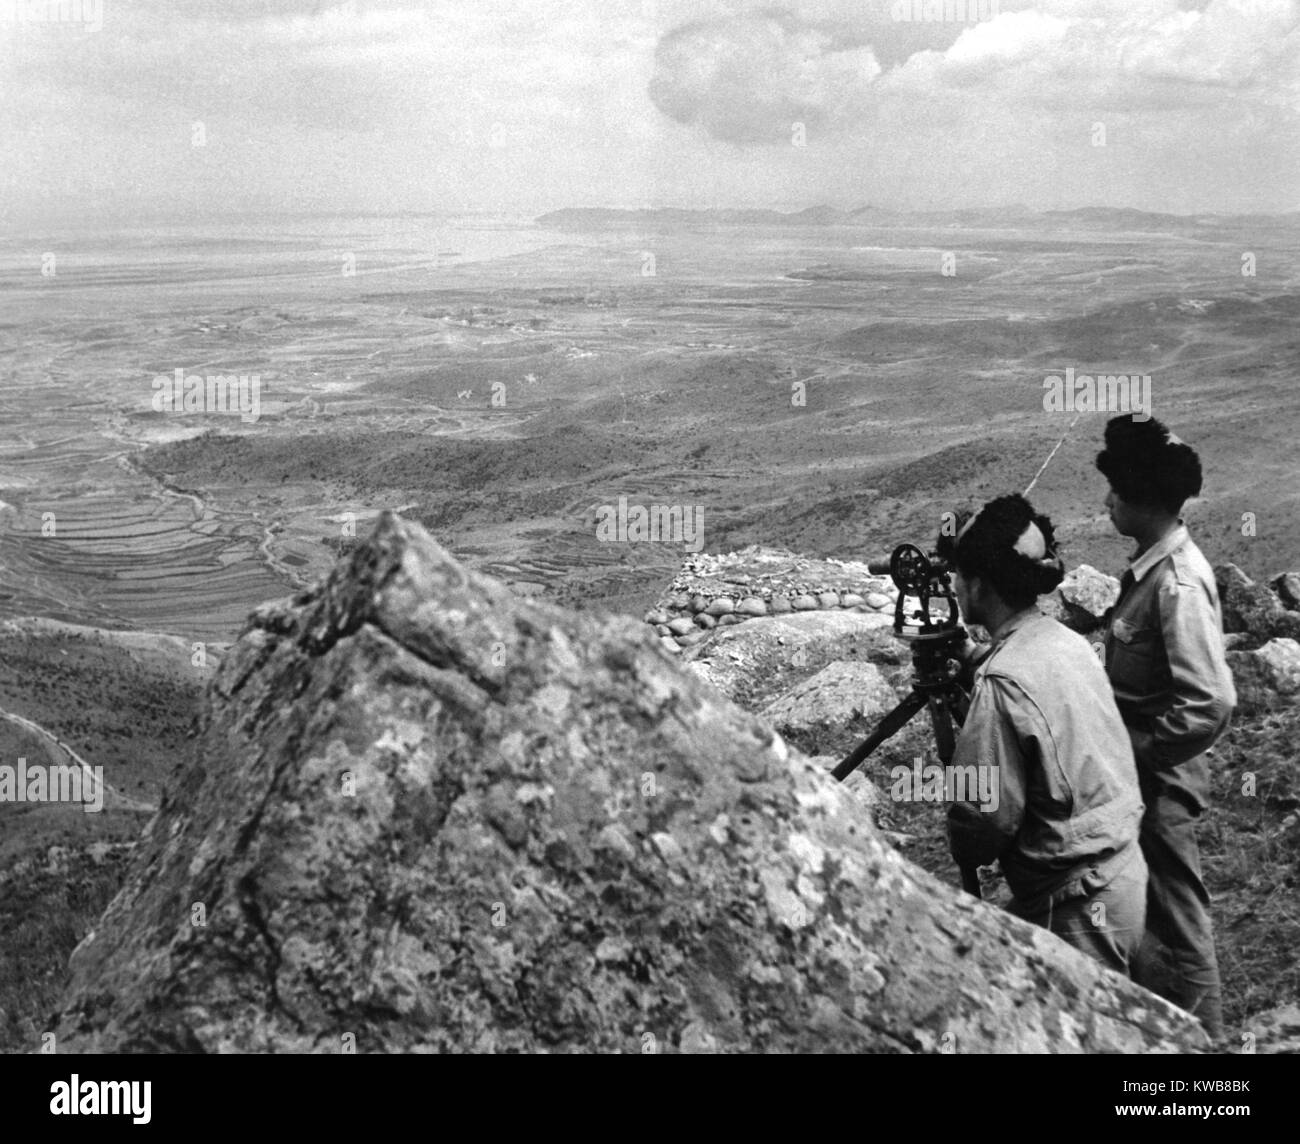 South Korean Army officers observe activities across the 38th Parallel from a mountain outpost. This photo was made just at the outbreak of the Korean war. June 1950 (BSLOC 2014 11 1) Stock Photo